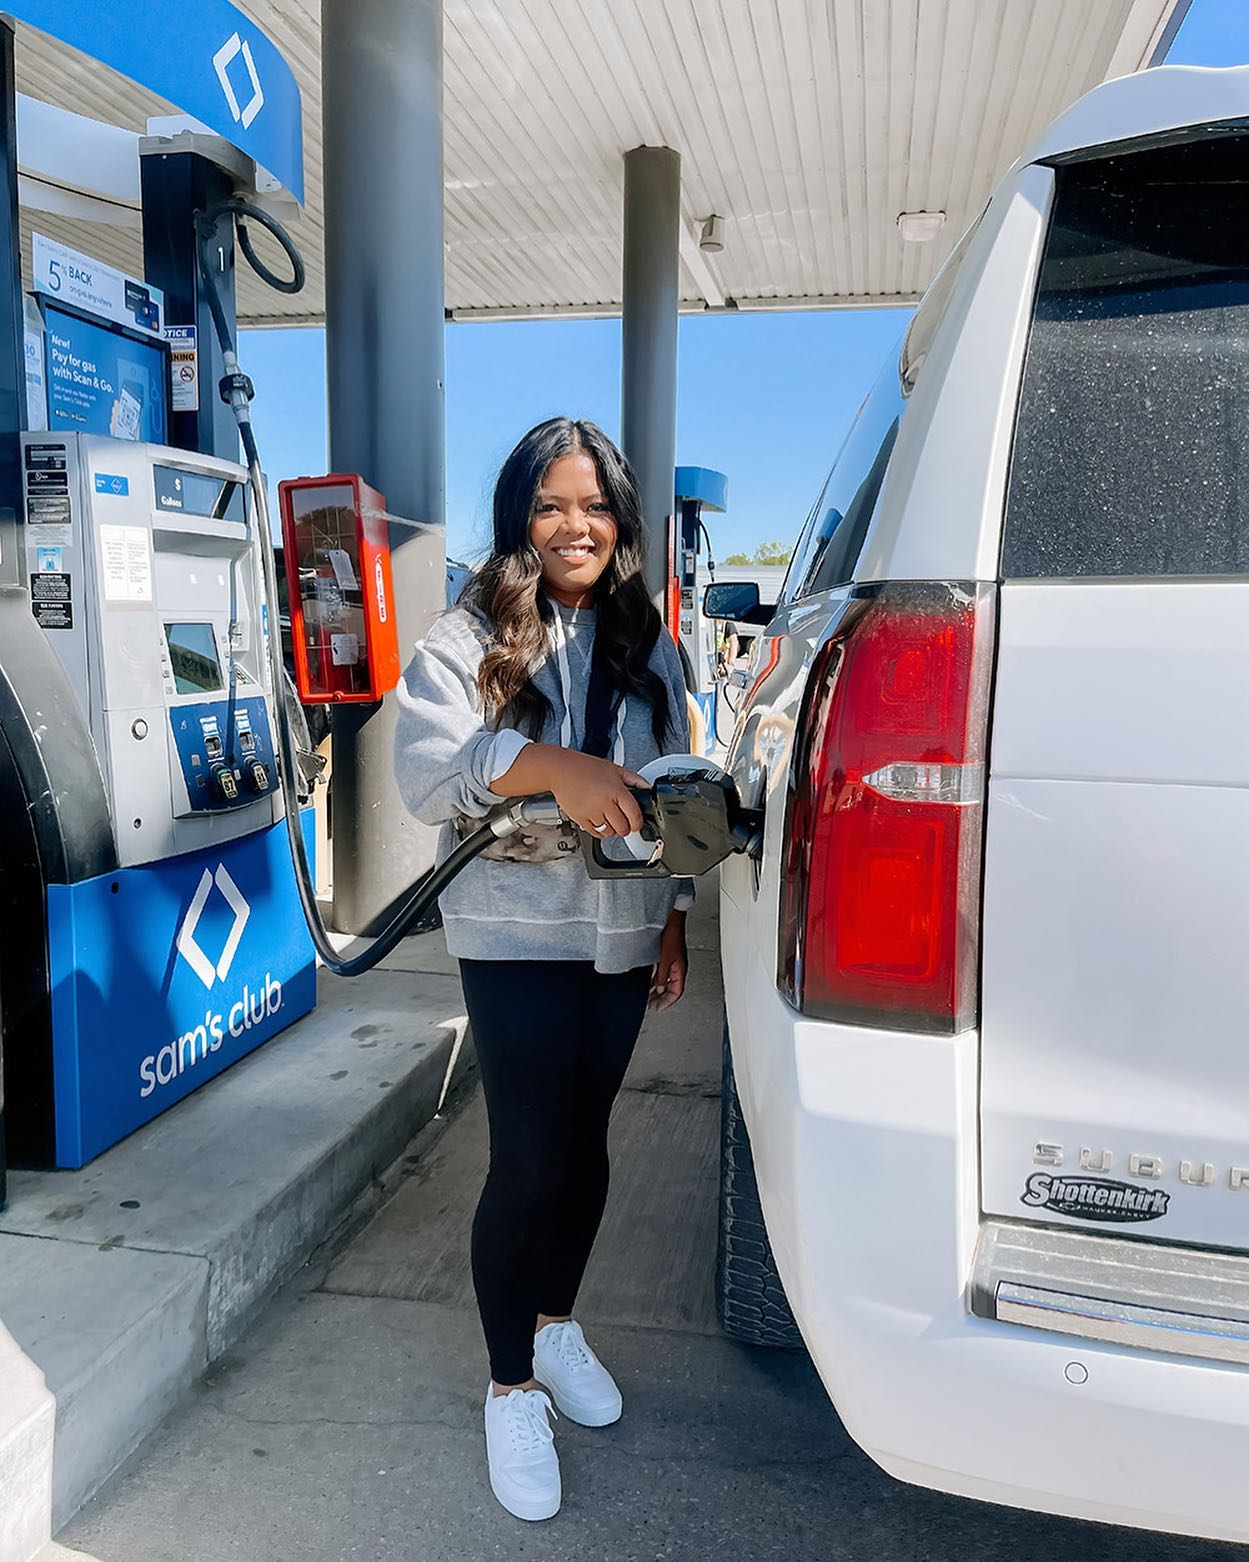 Life got extra busy this year when my youngest Sebastian started sports.  Going from 3 kids in activities/sports to 4 kids was a huge change for our us!  #ad I spend a lot of my time driving them around, and I’m so glad as a #WalmartPlus member, I can save up to 10¢ per gallon at Exxon and Mobil gas stations, select Walmart and Murphy gas stations, and Sam’s Club locations across the country.  You just sign into your Walmart+ account on the @Walmart app, enter your fuel pump number, select your grade, and start fueling! 

*Fuel discount varies by location & station, subject to change

#liketkit #LTKfamily #LTKunder50
@shop.ltk https://liketk.it/3FHNa